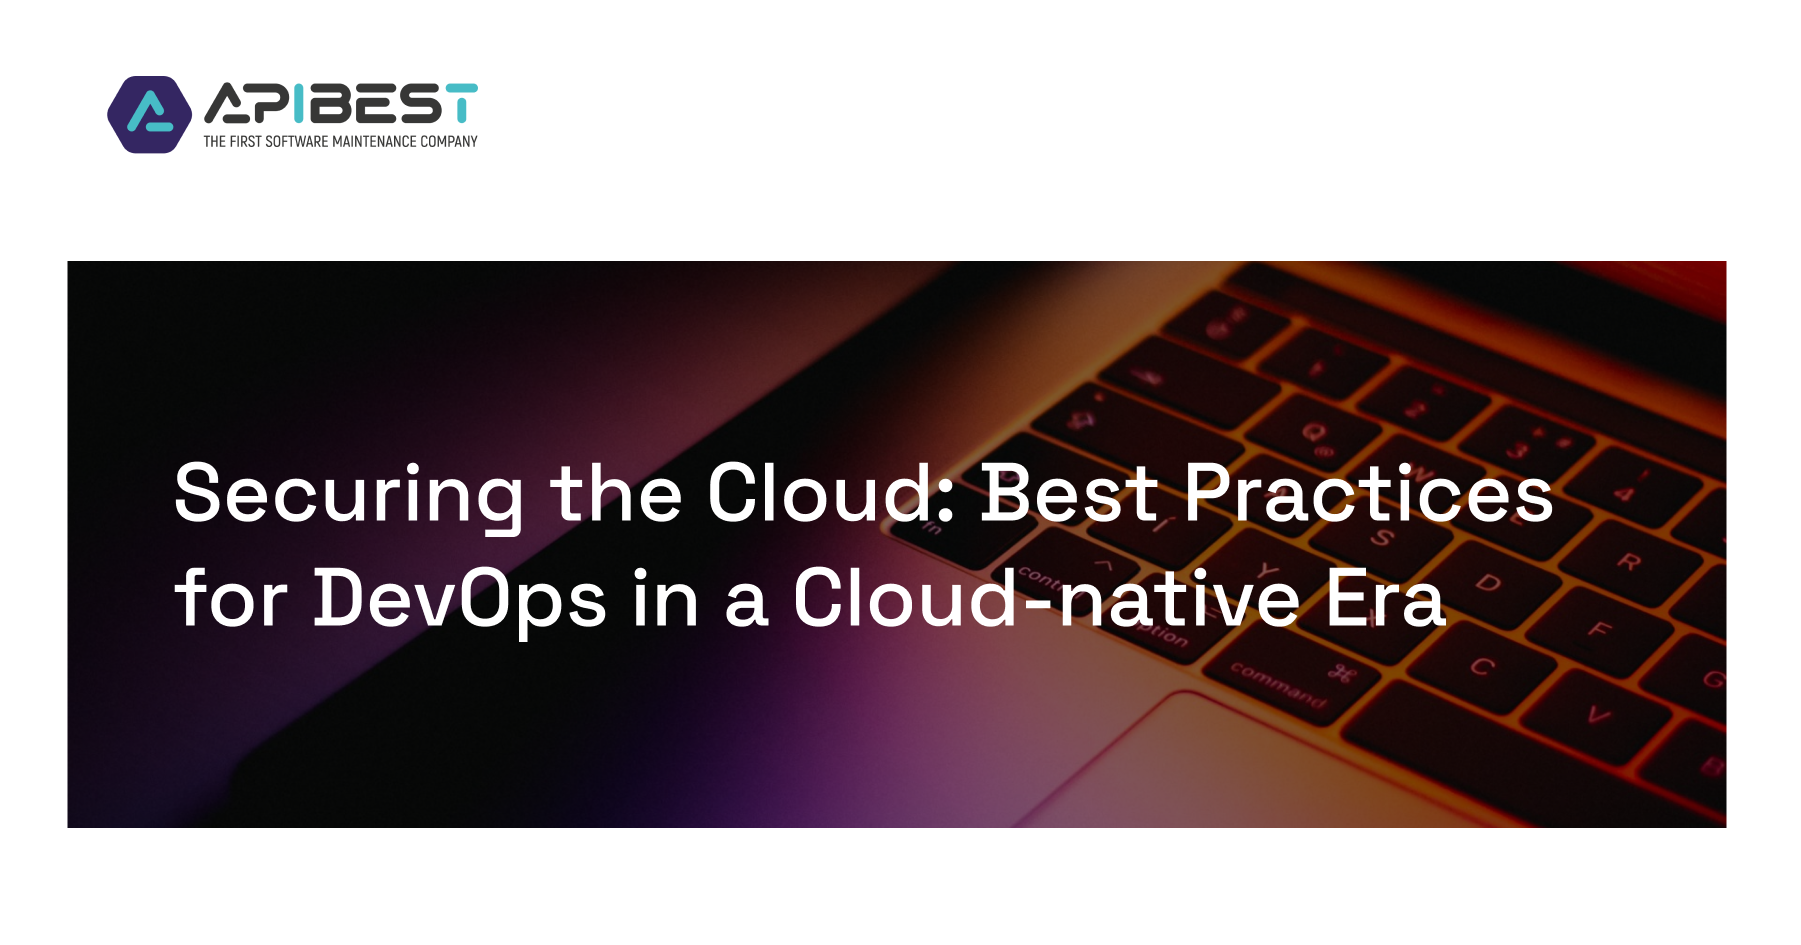 Securing the Cloud: Best Practices for DevOps in a Cloud-native Era